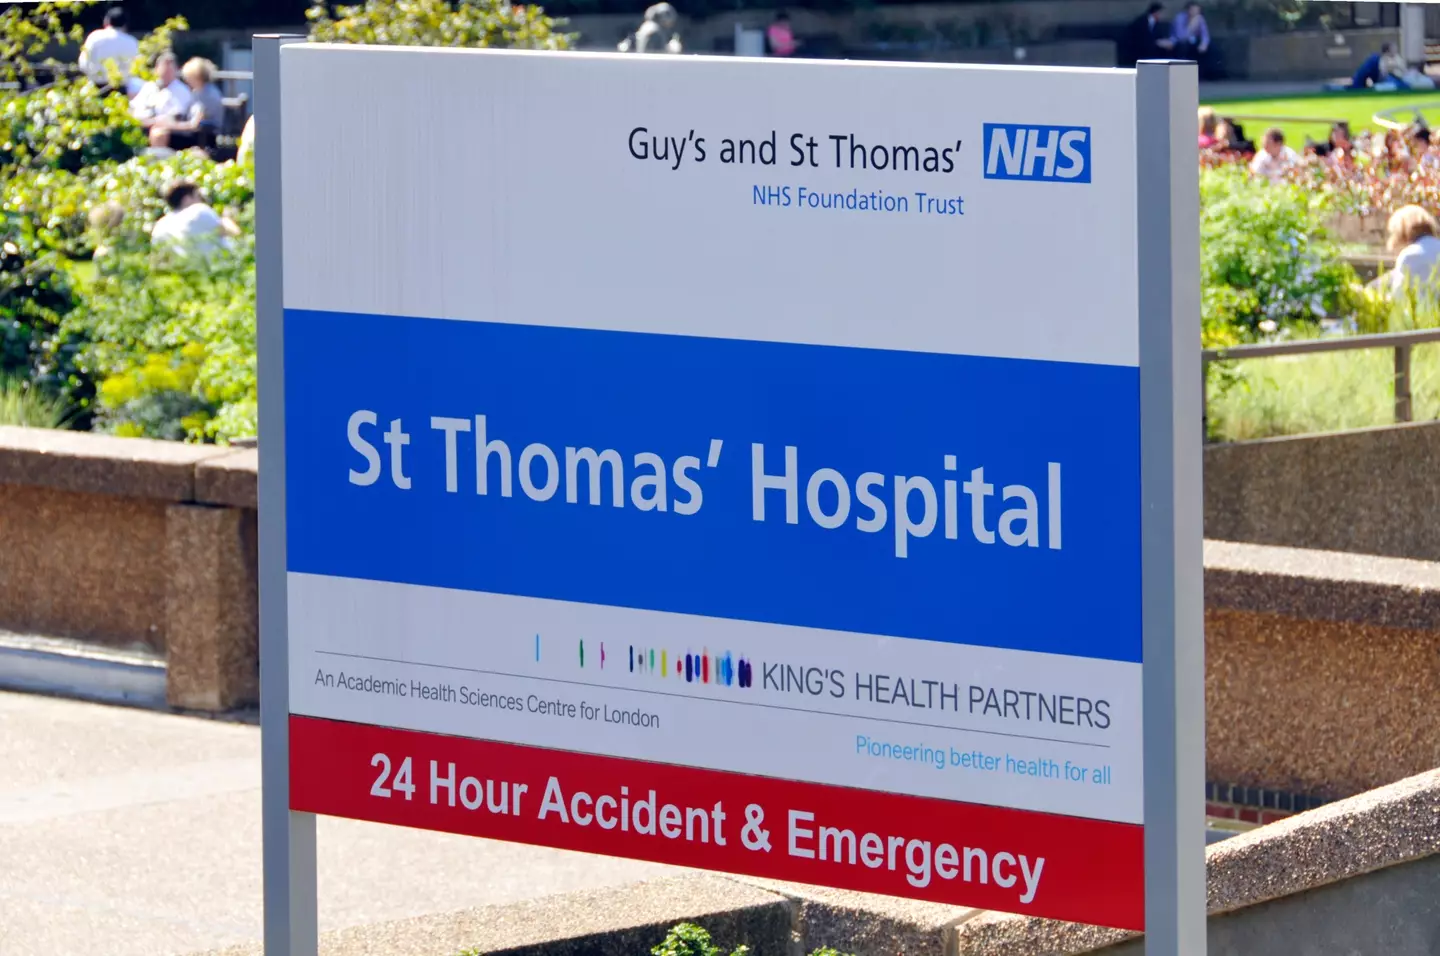 The first patient received treatment at Guys' and St Thomas' hospital.